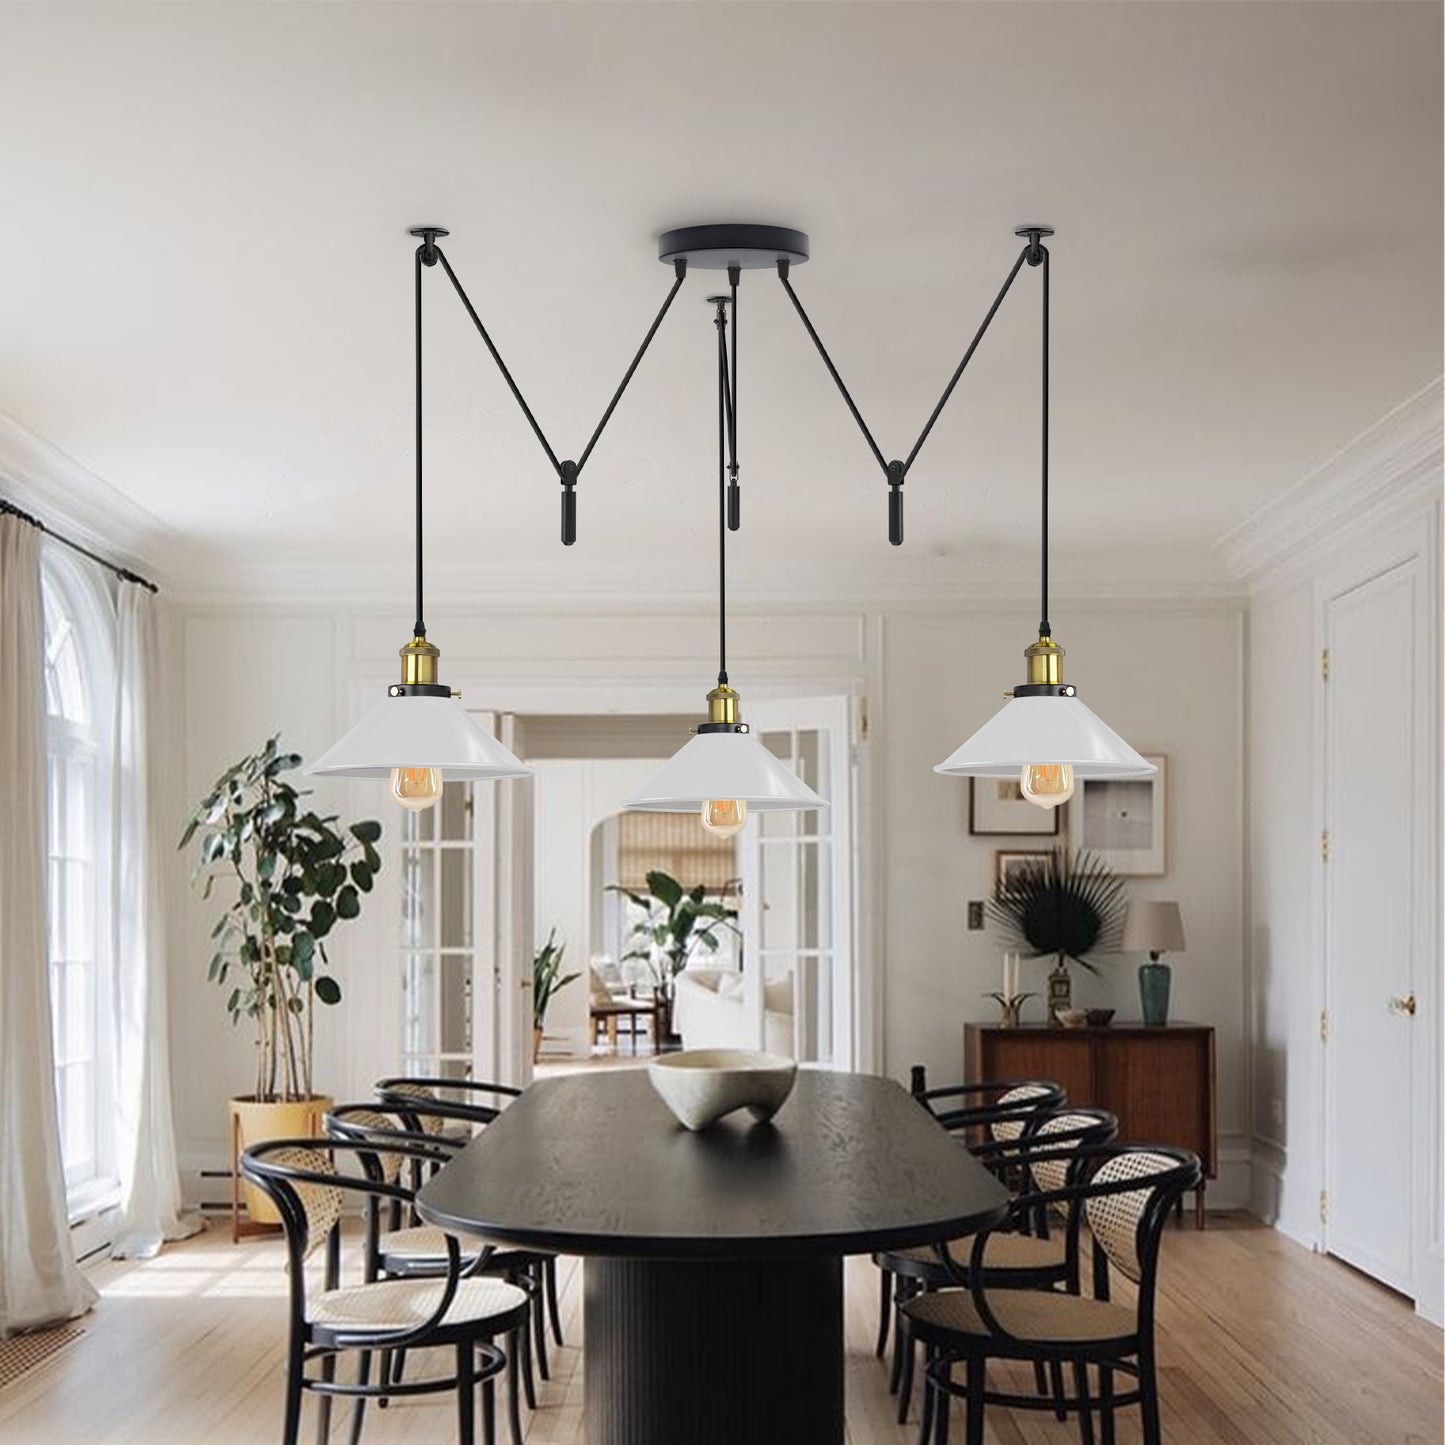 white  3 pendant light with adjustable for dining room.JPG